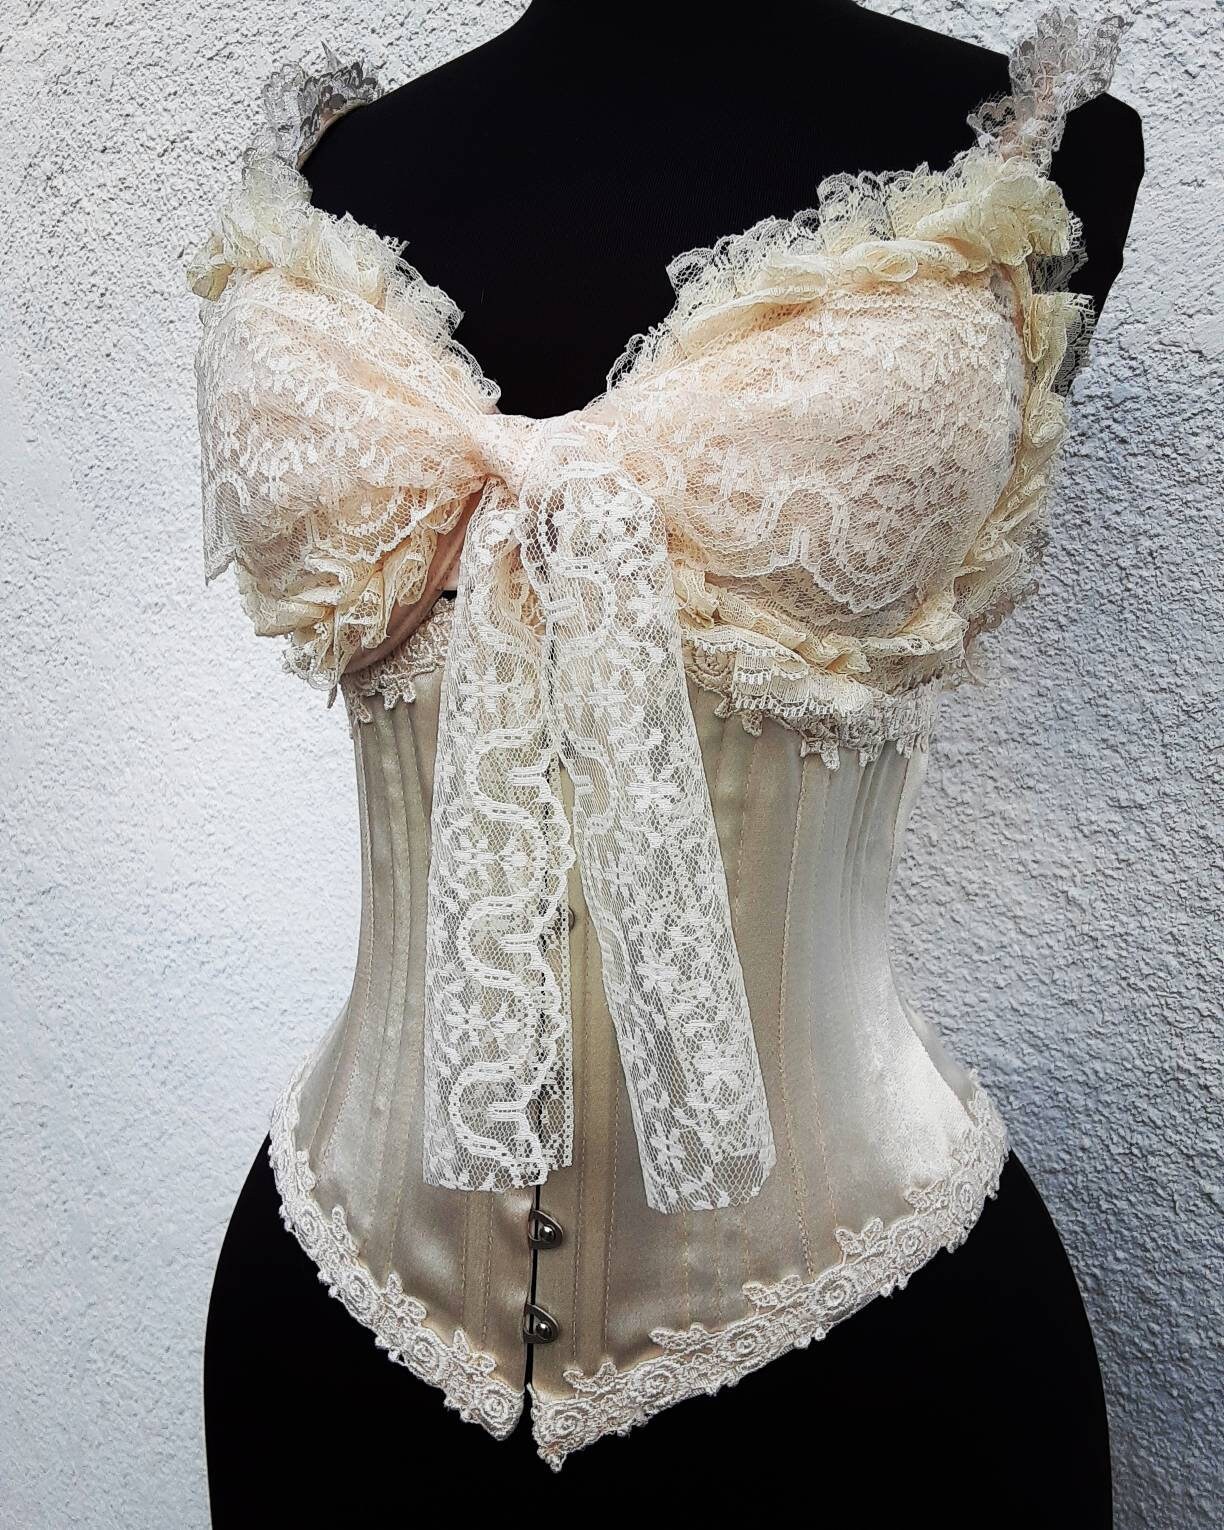 Delphine unmentionables handmade ivory Ruffled Victorian | Etsy